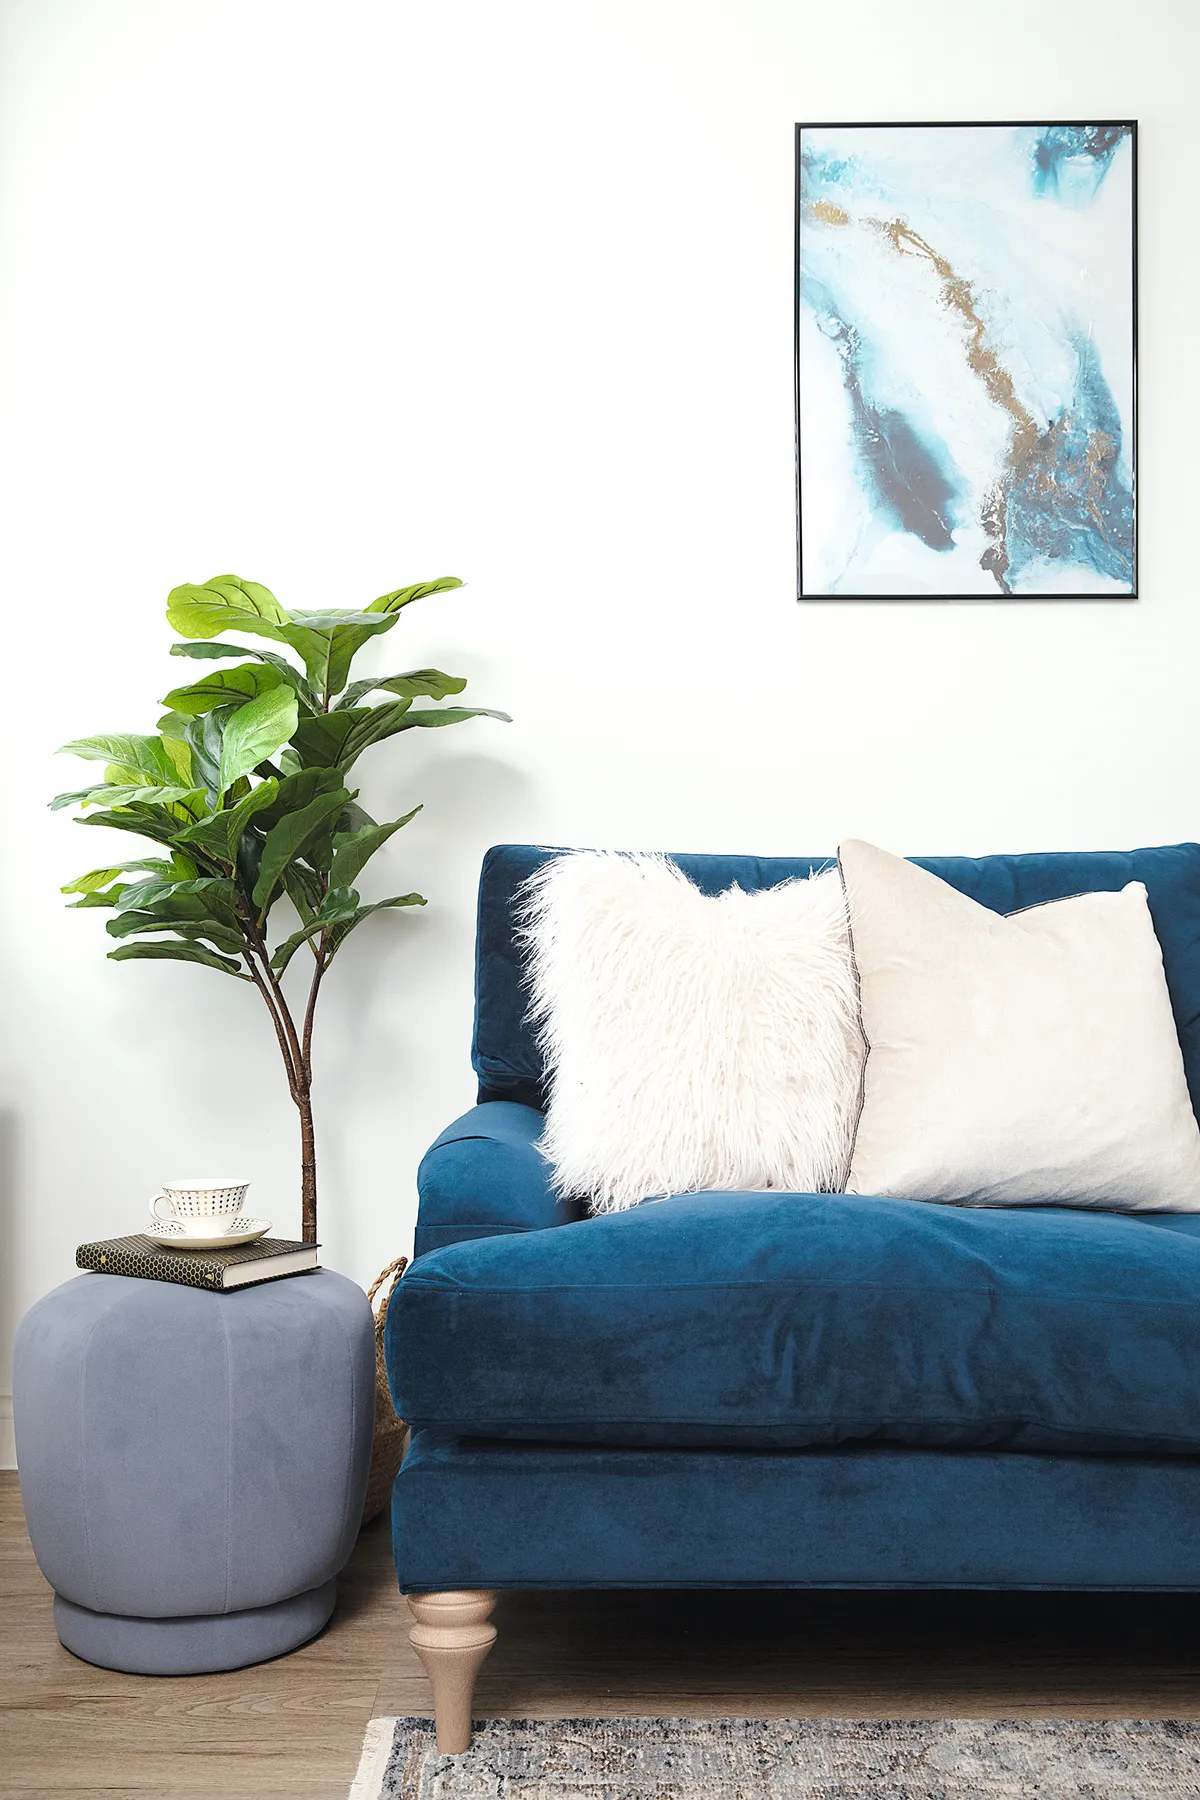 ‘I bought the blue and gold artwork from Desenio to tie in with the navy sofa. The upholstered stool from HomeSense makes a lovely side table’